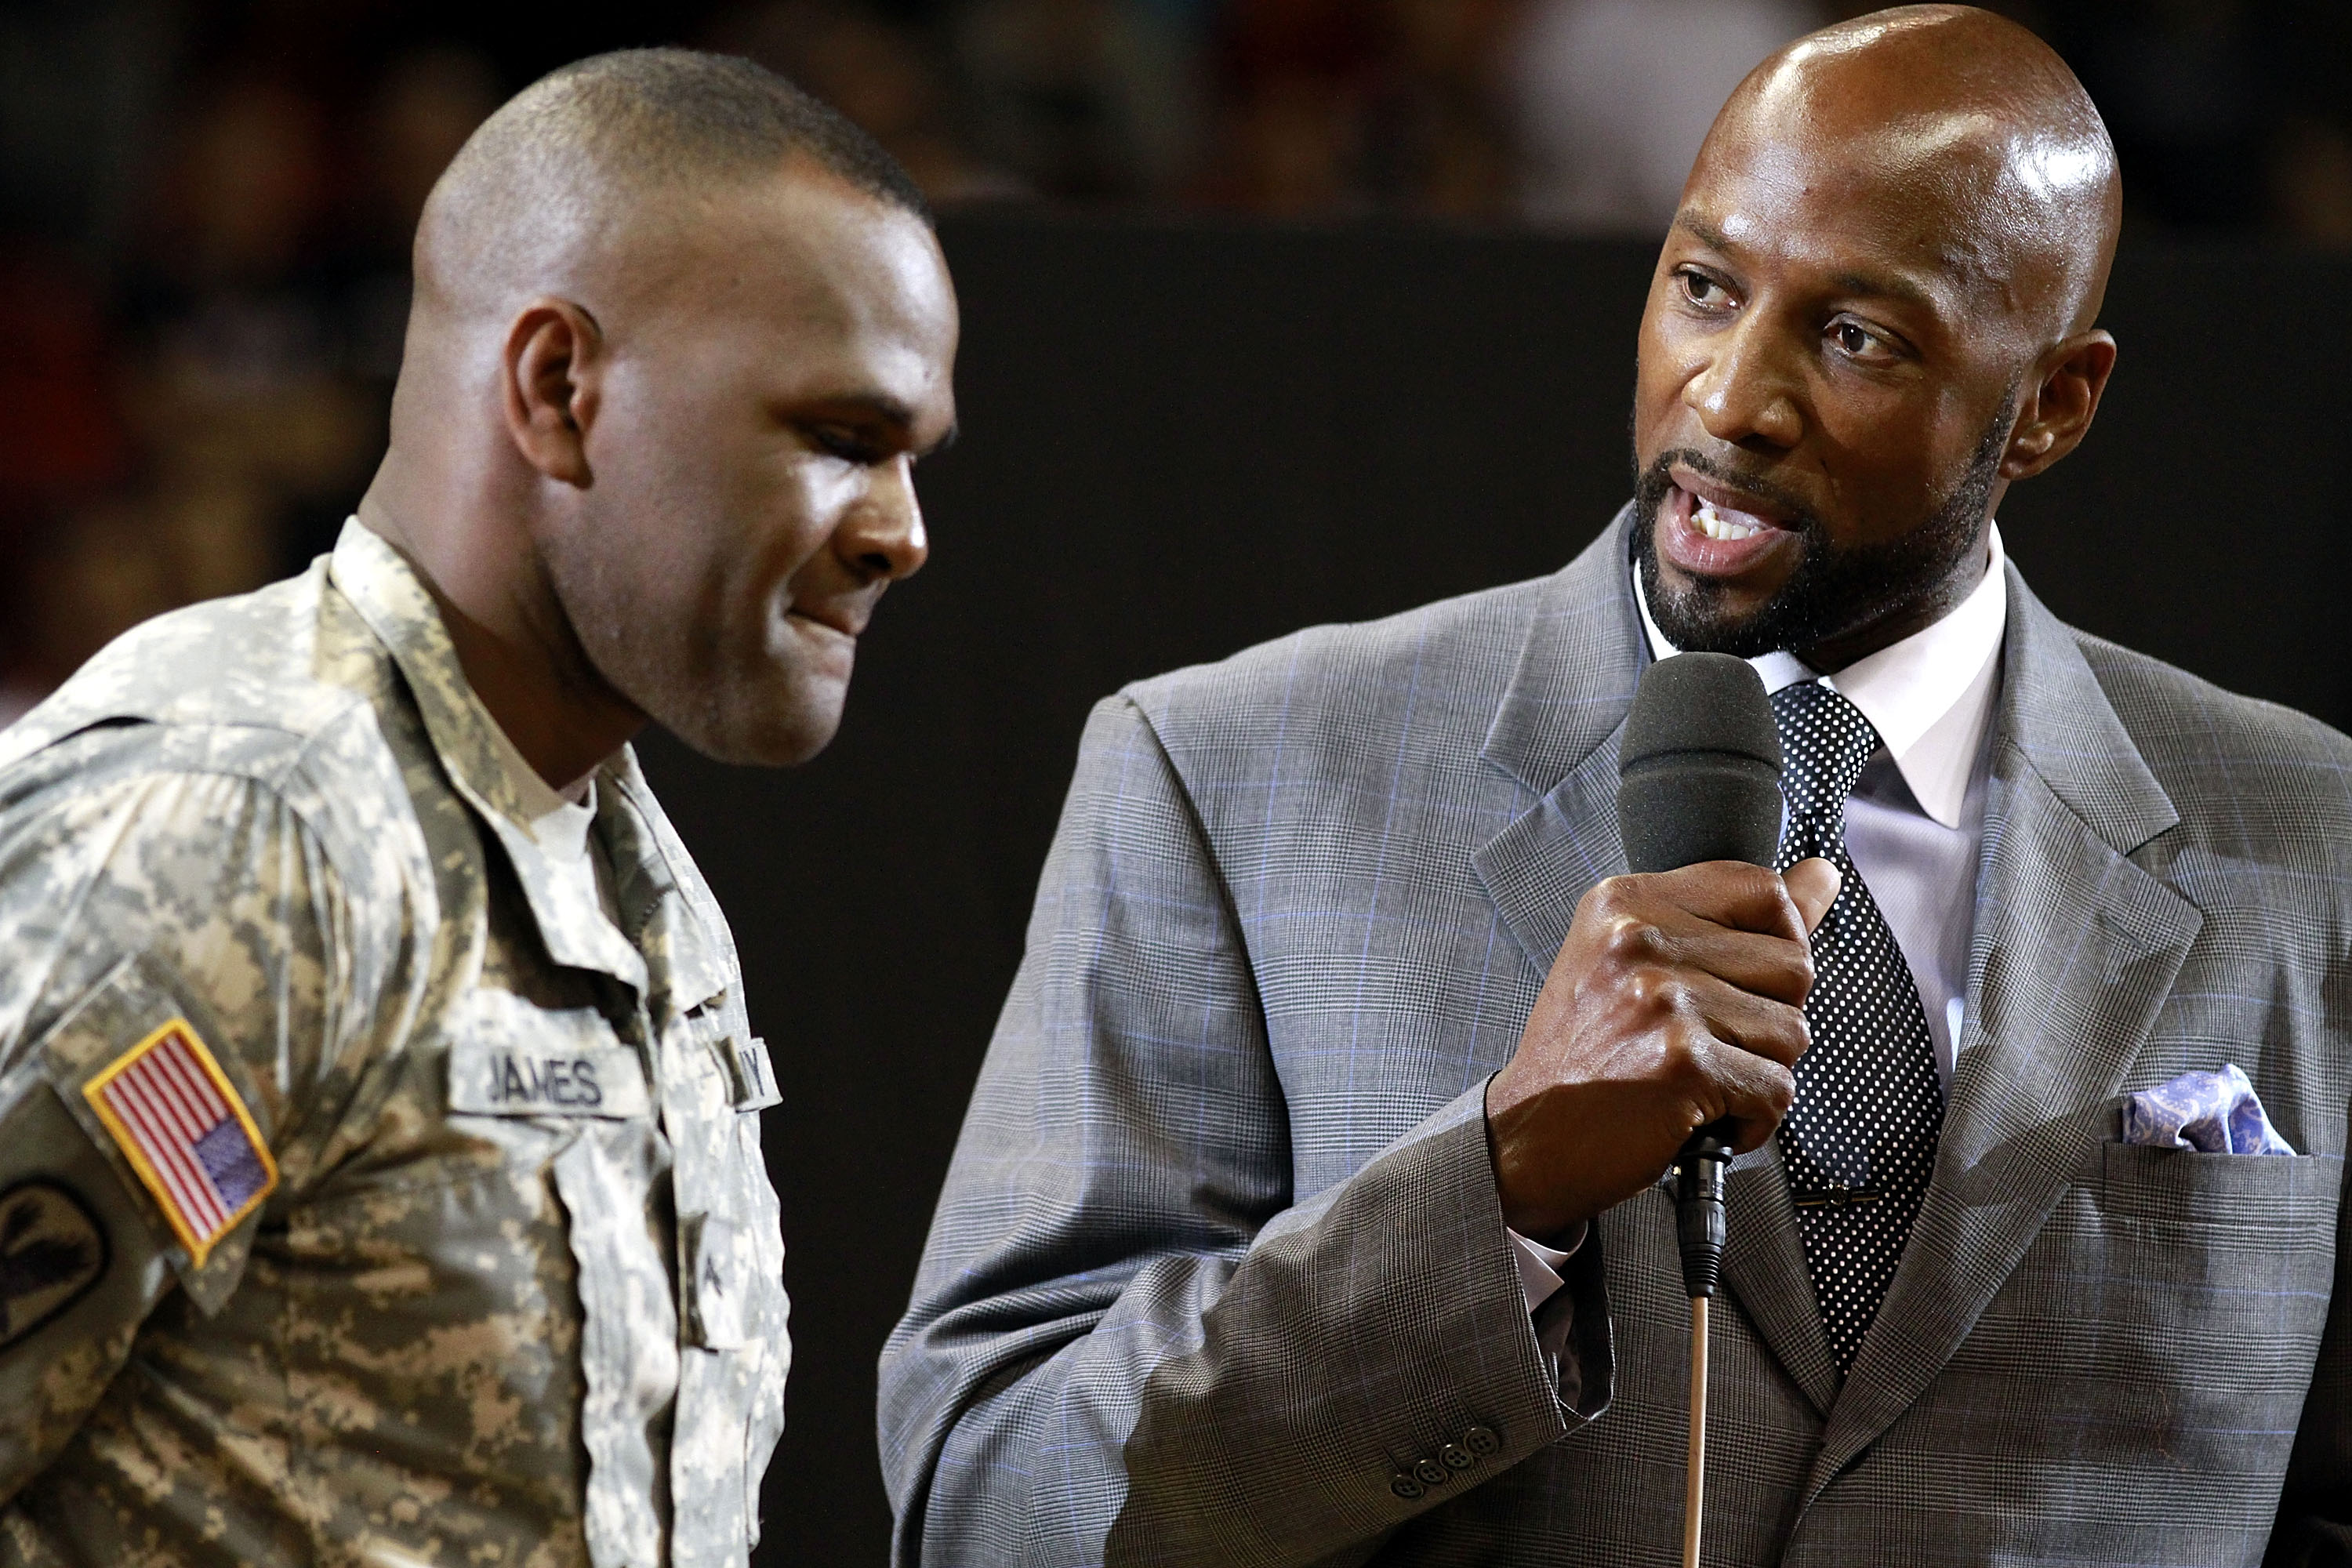 MIAMI, FL - MARCH 19:  Former Miami Heat Players Tim James (L) and Alonzo Mourning chat prior to  Miami Heat against the Denver Nuggets at American Airlines Arena on March 19, 2011 in Miami, Florida. NOTE TO USER: User expressly acknowledges and agrees th